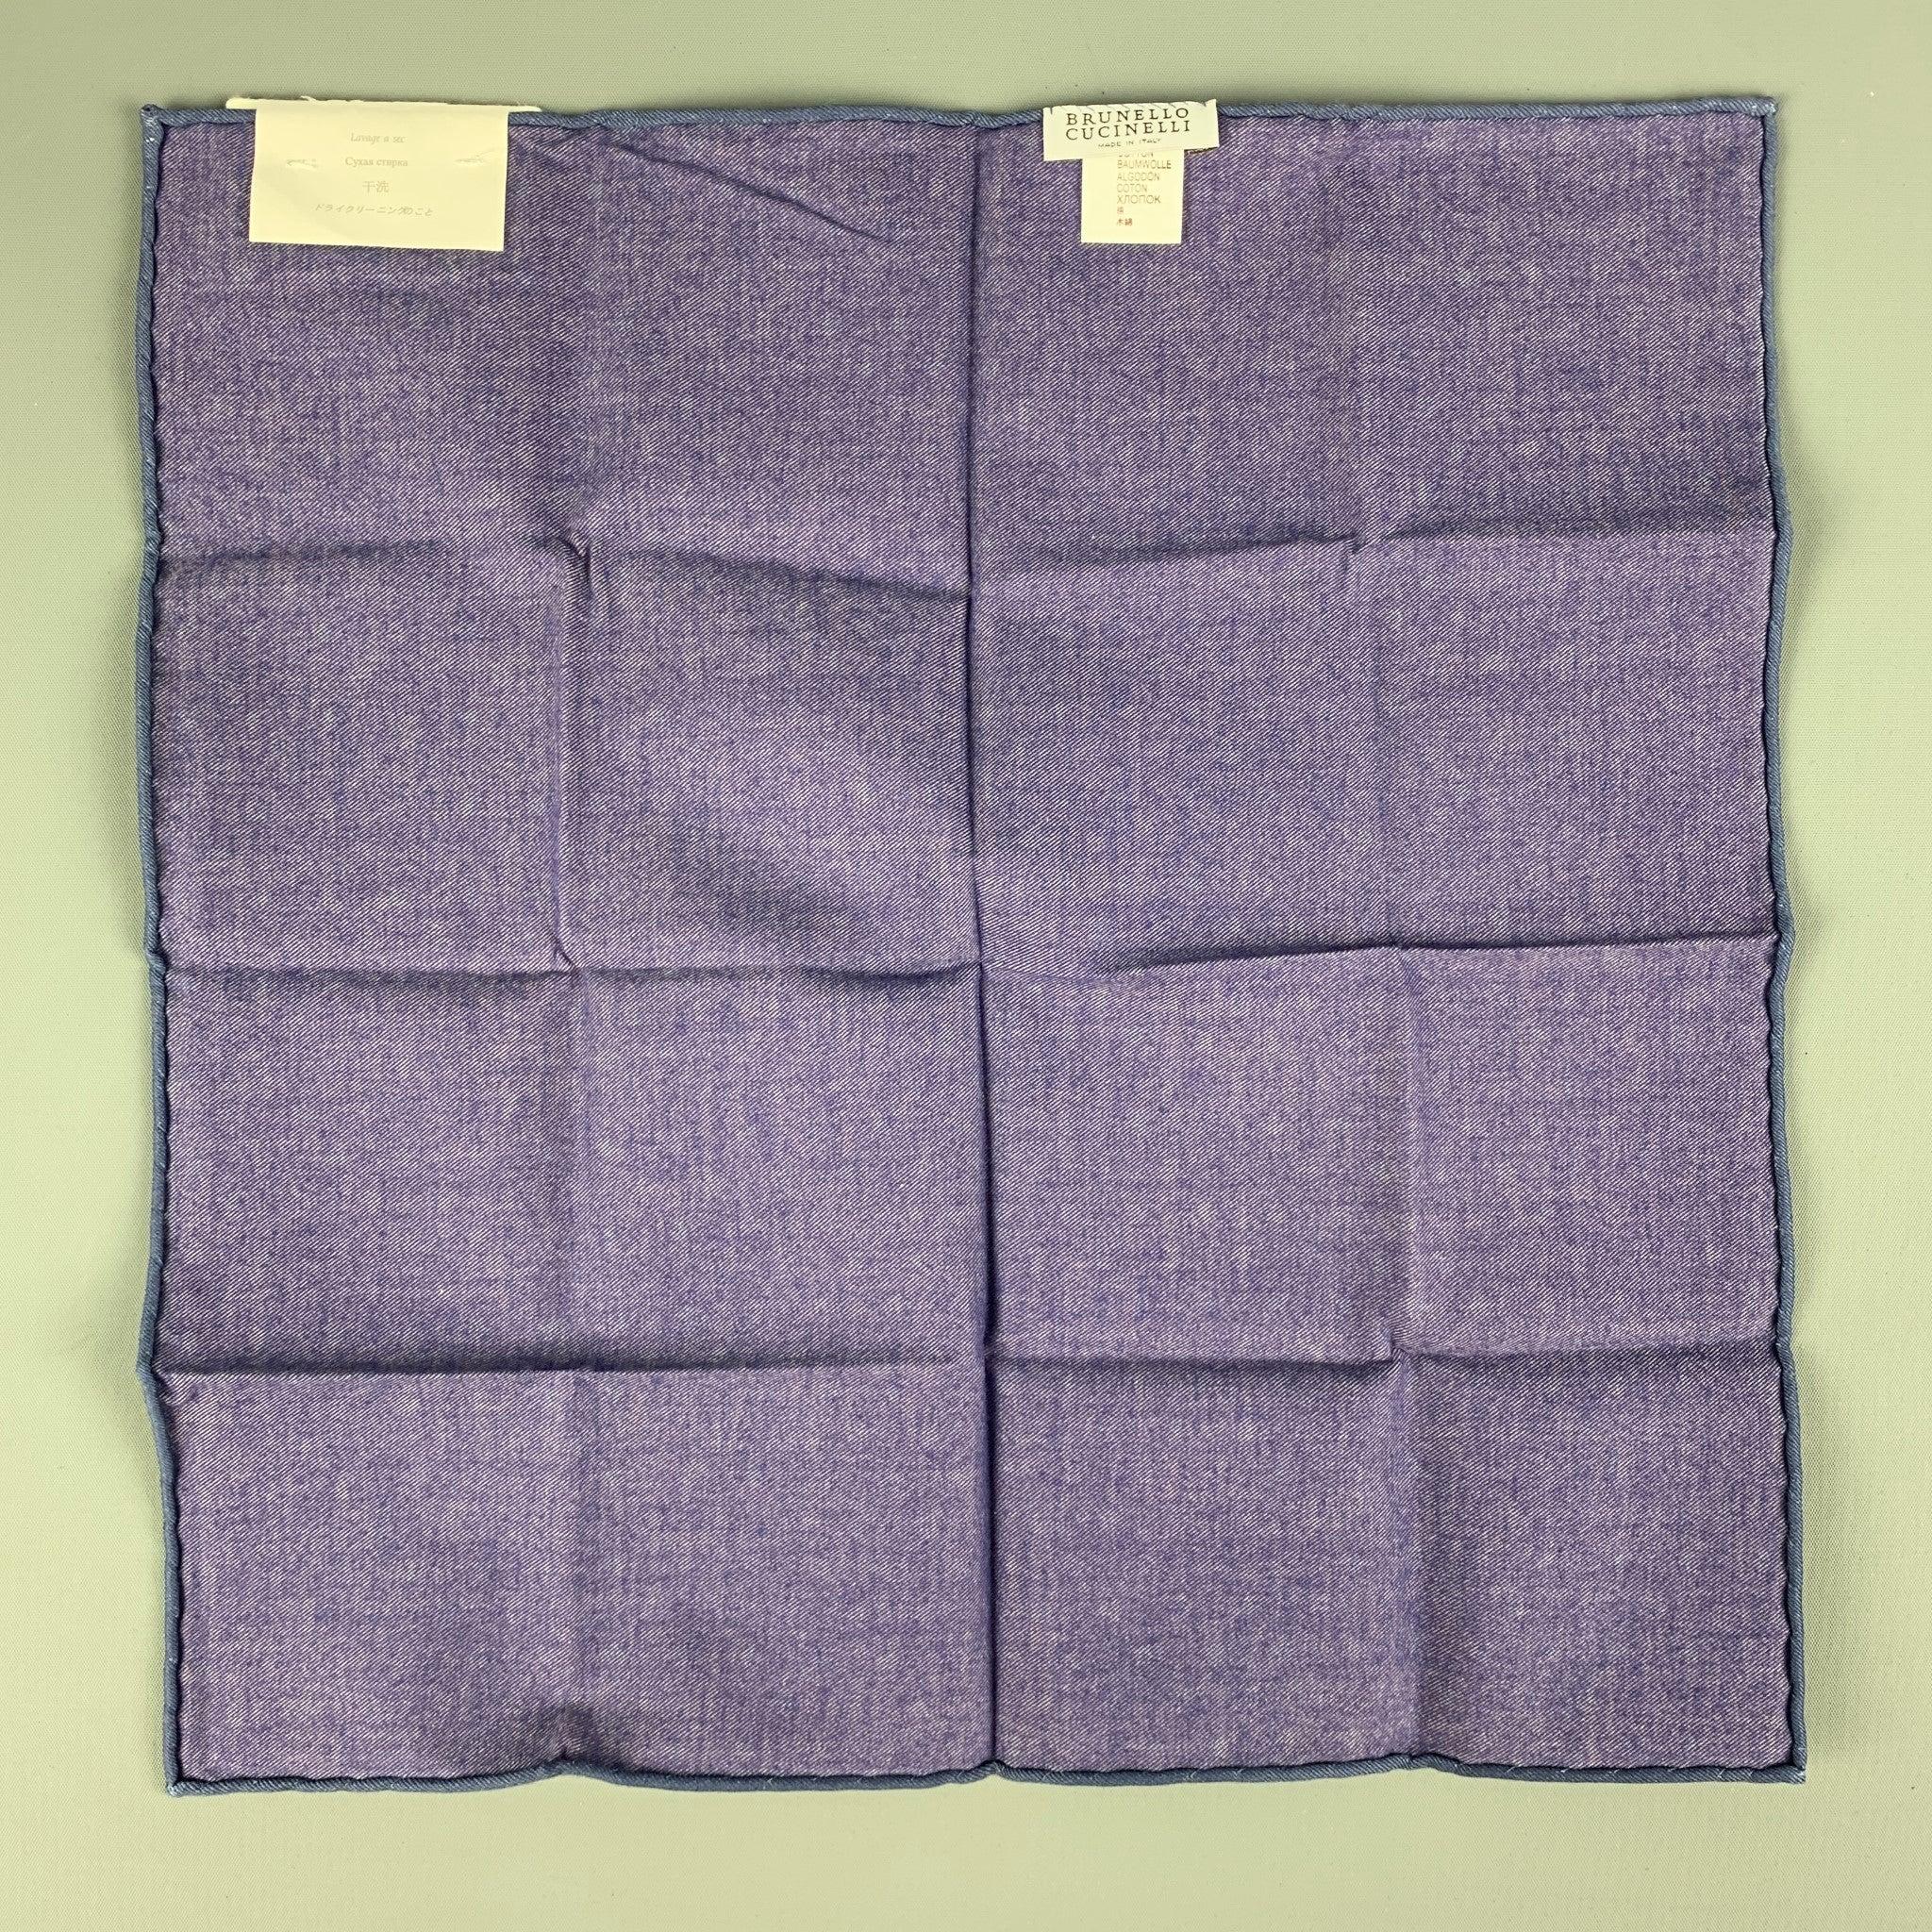 BRUNELLO CUCINELLI Eggplant Navy Floral Cotton Pocket Square In Good Condition For Sale In San Francisco, CA